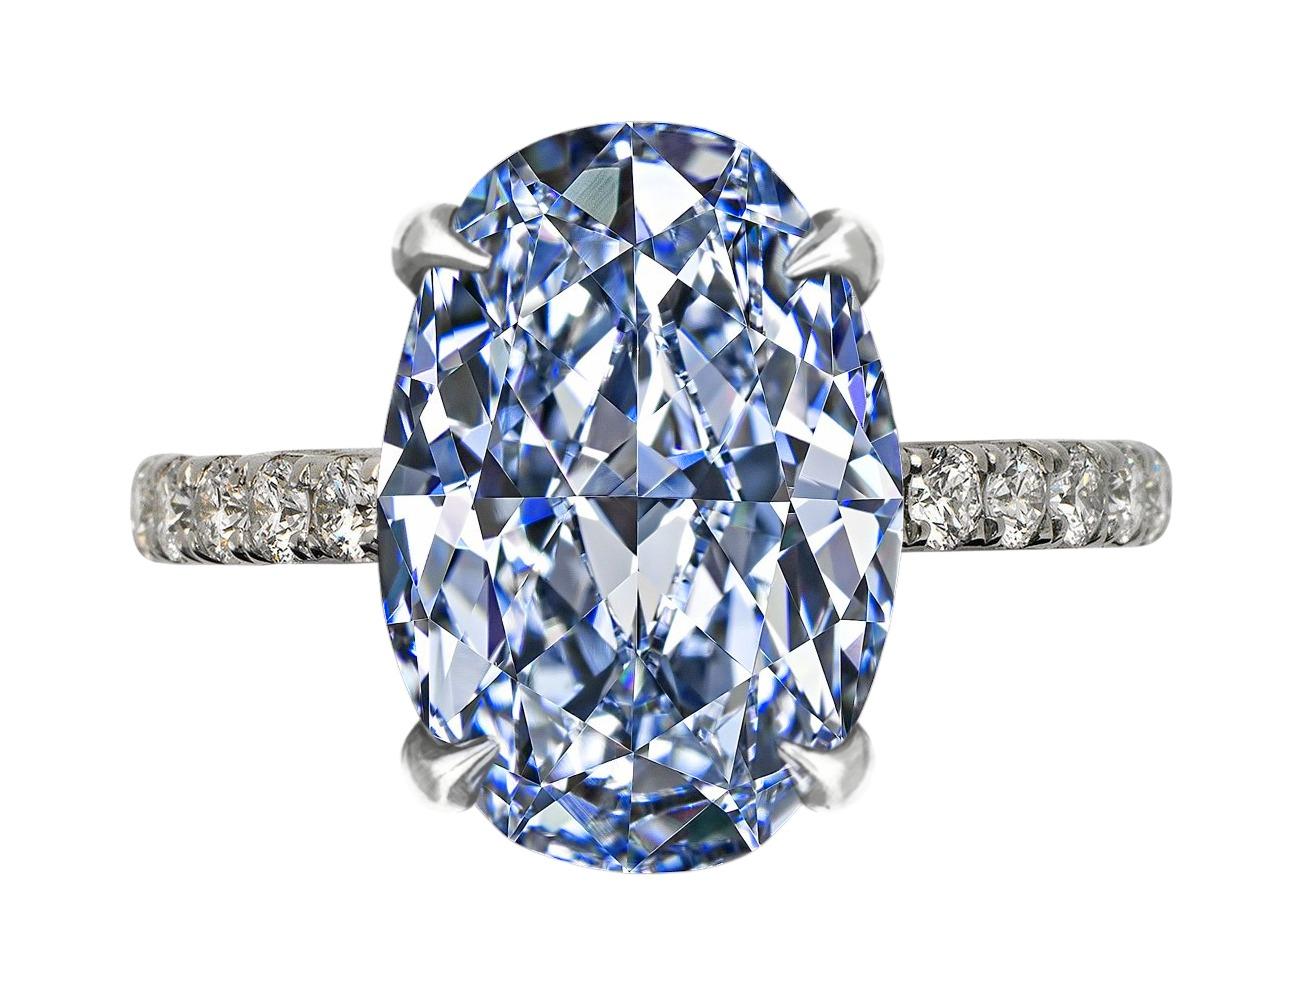 EXCEPTIONAL GIA Certified 2 Carat Fancy Blue Diamond Solitaire Ring 
for investment purposes a one of a kind diamond